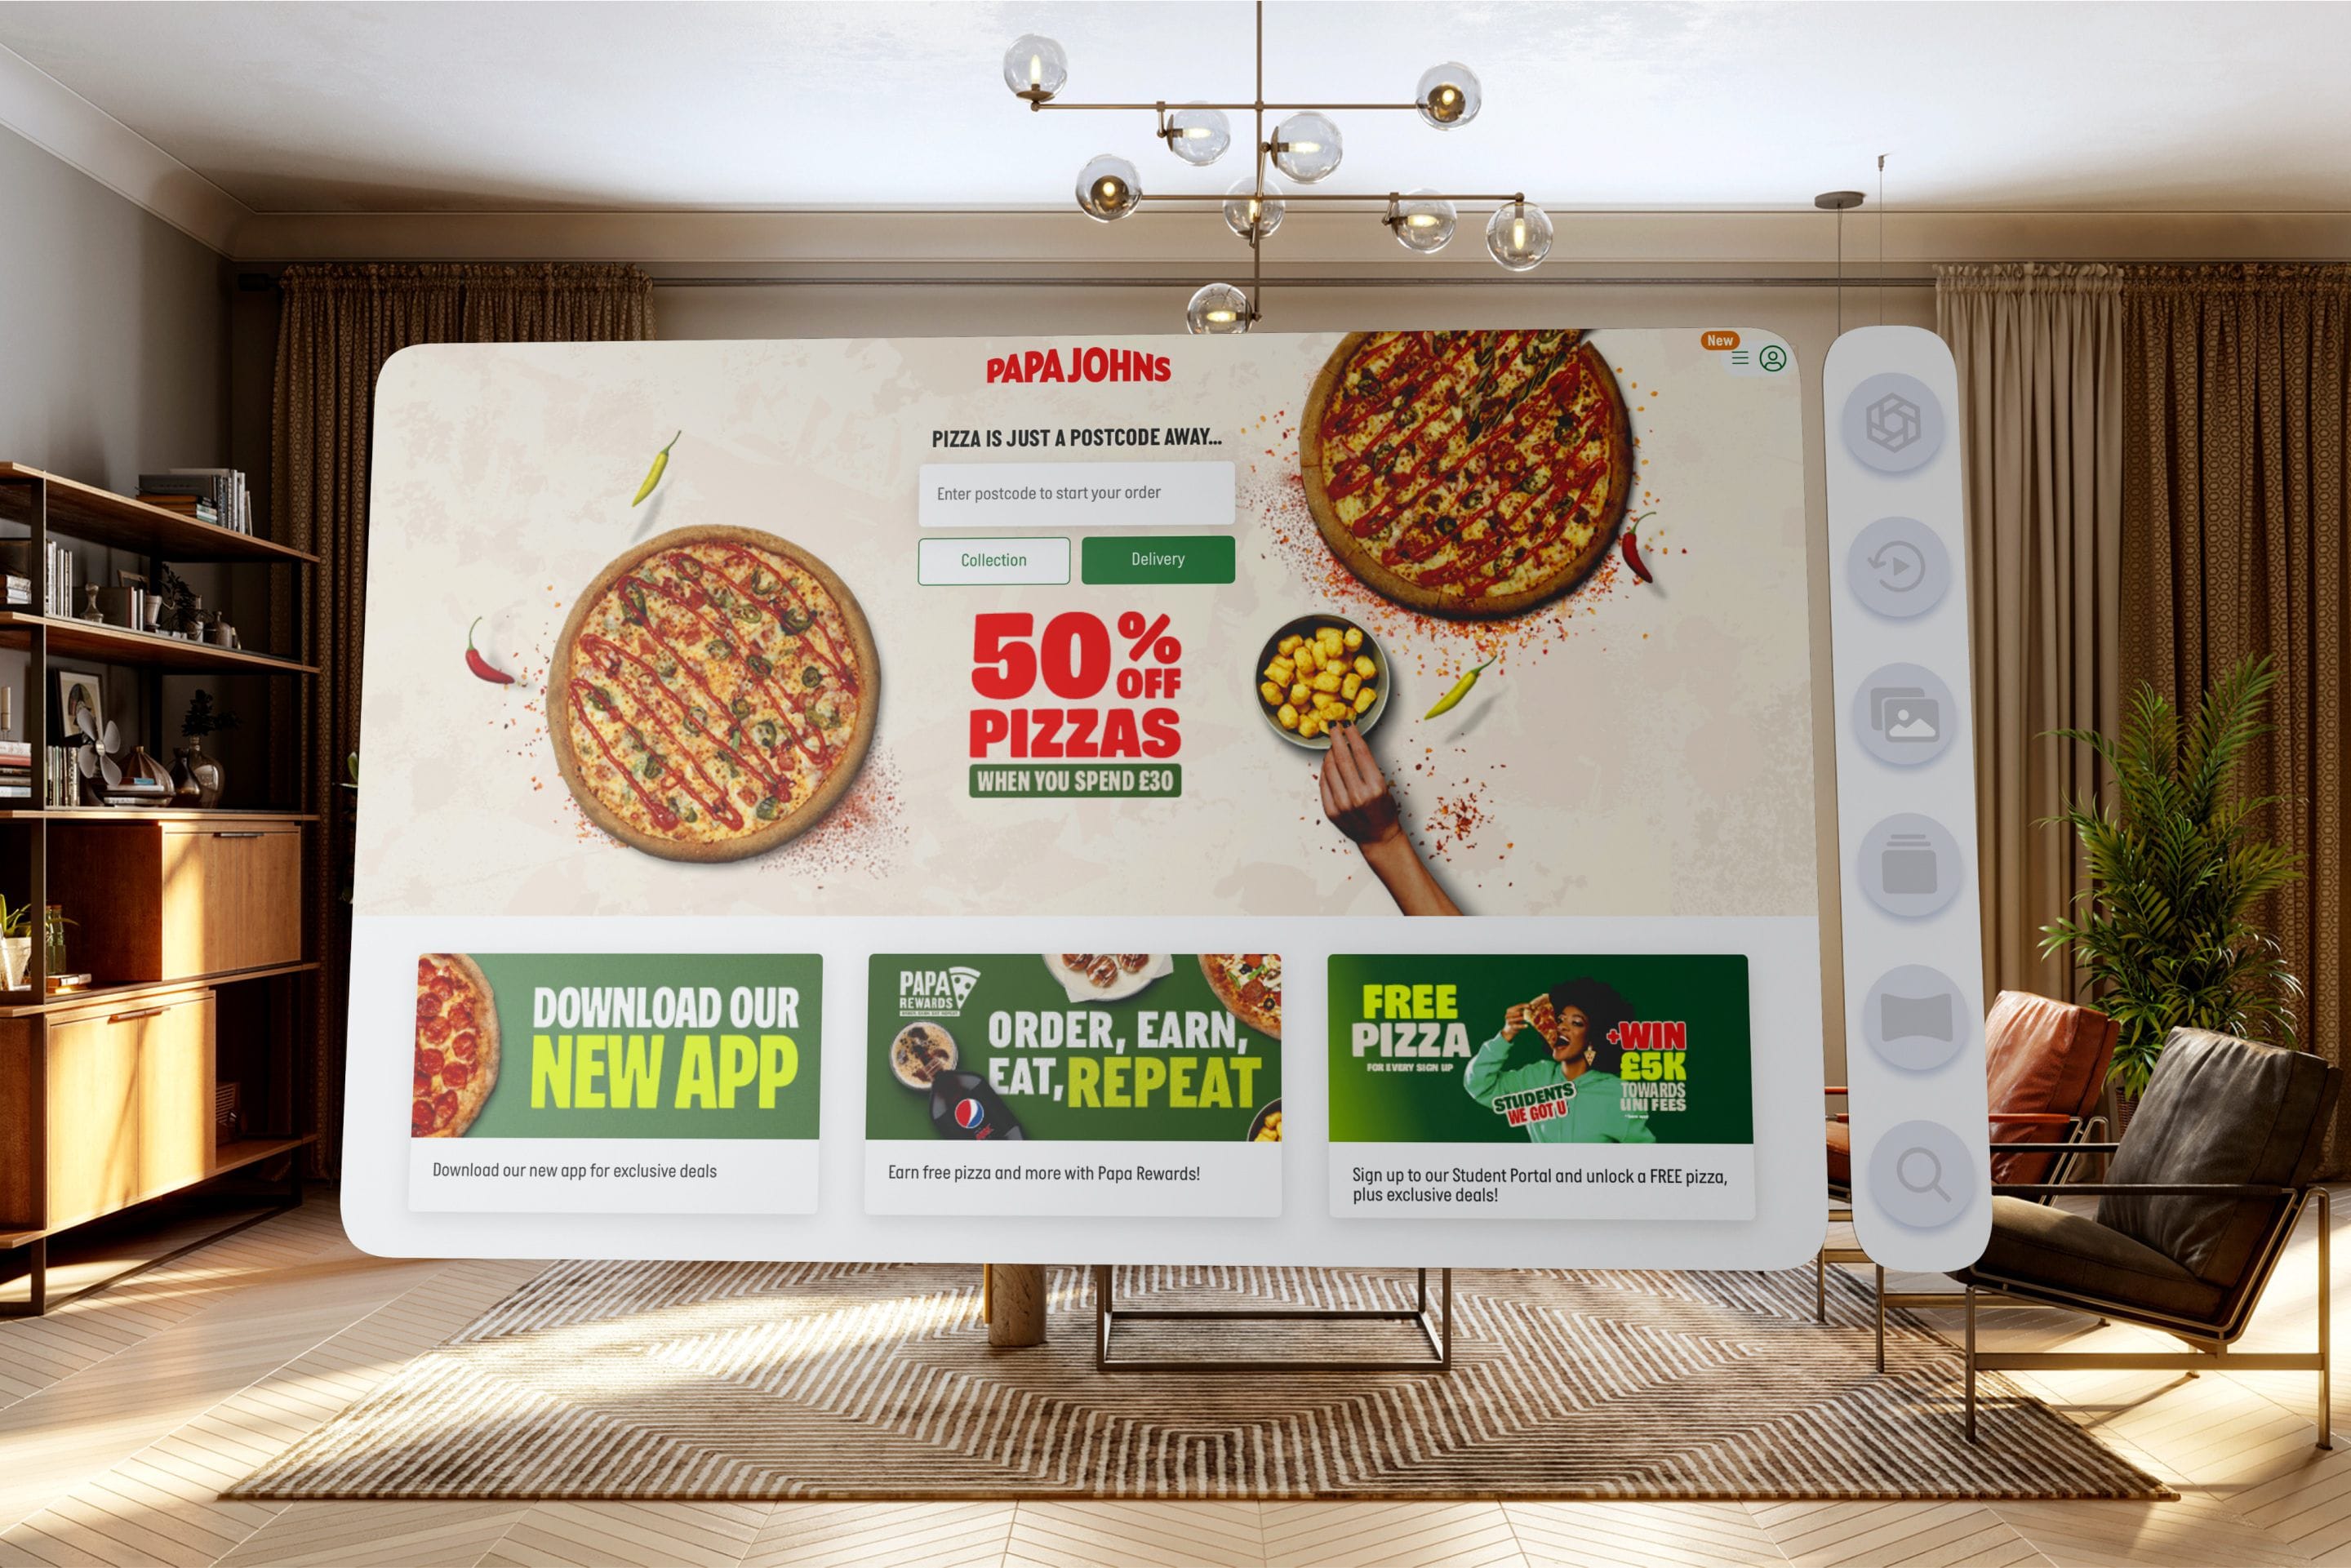 50% off pizzas when you spend £30